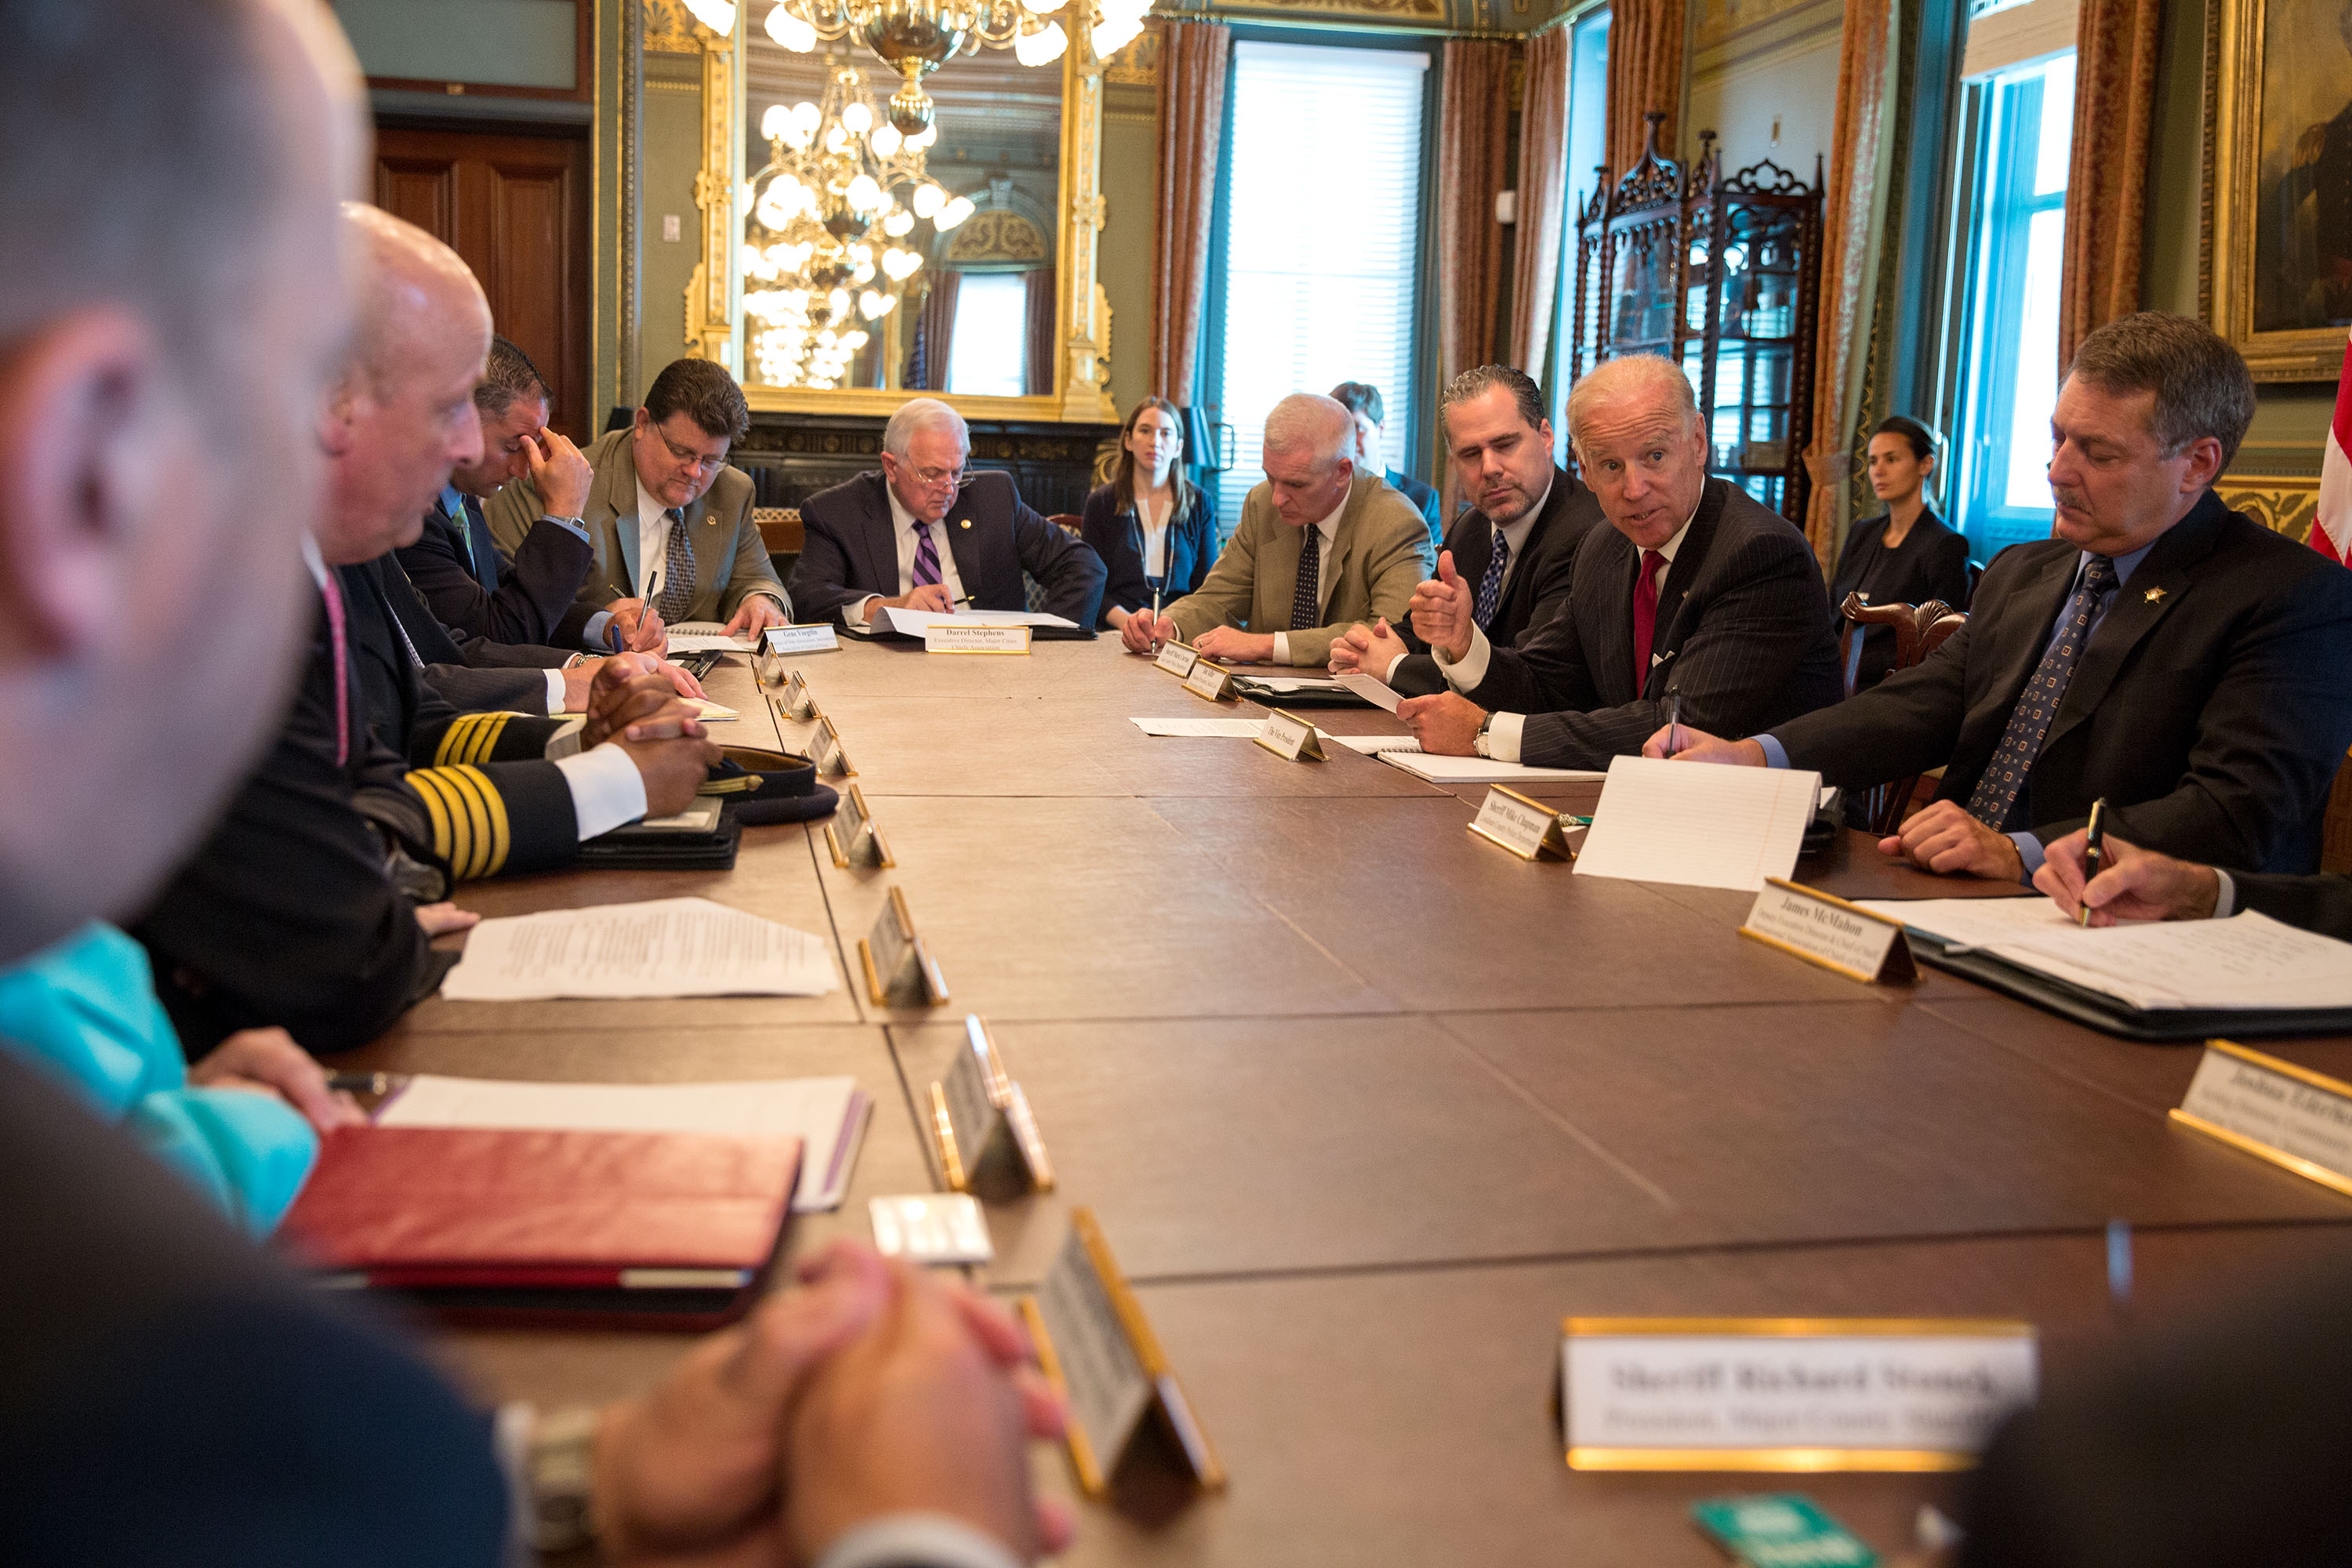 Vice President Biden Meets with Law Enforcement on Immigration Reform